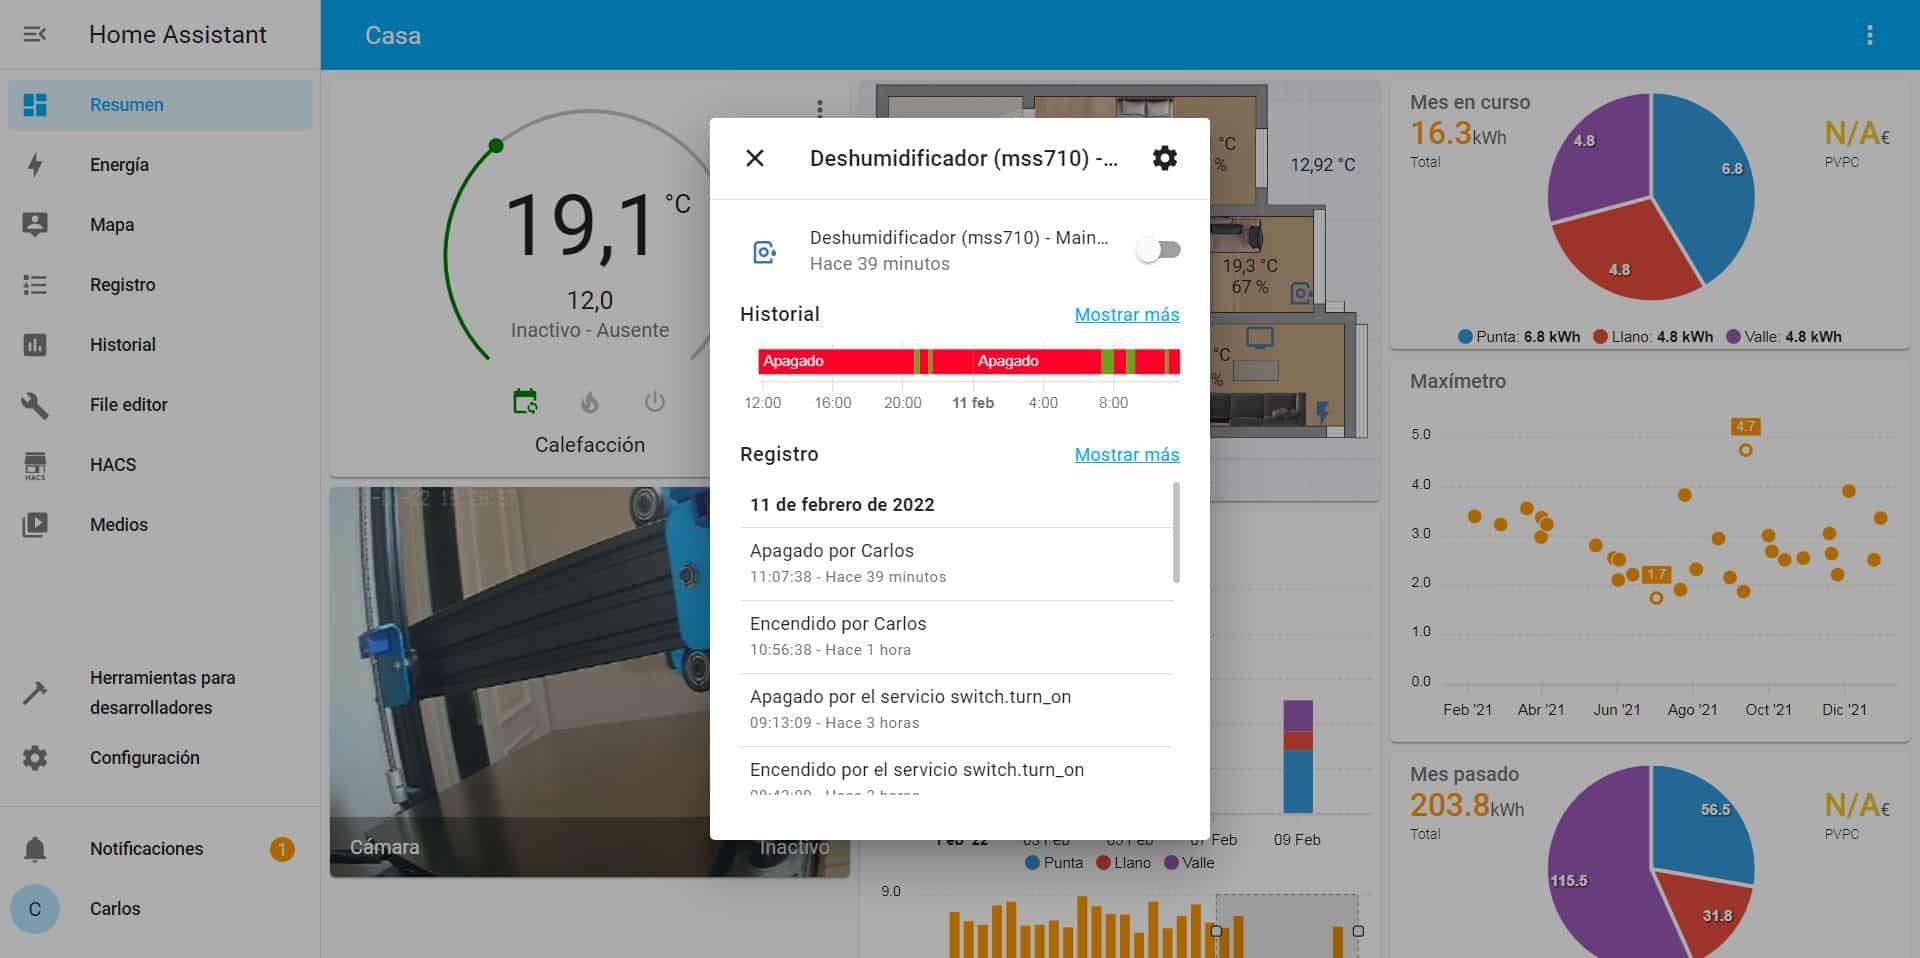 Home Assistant 2